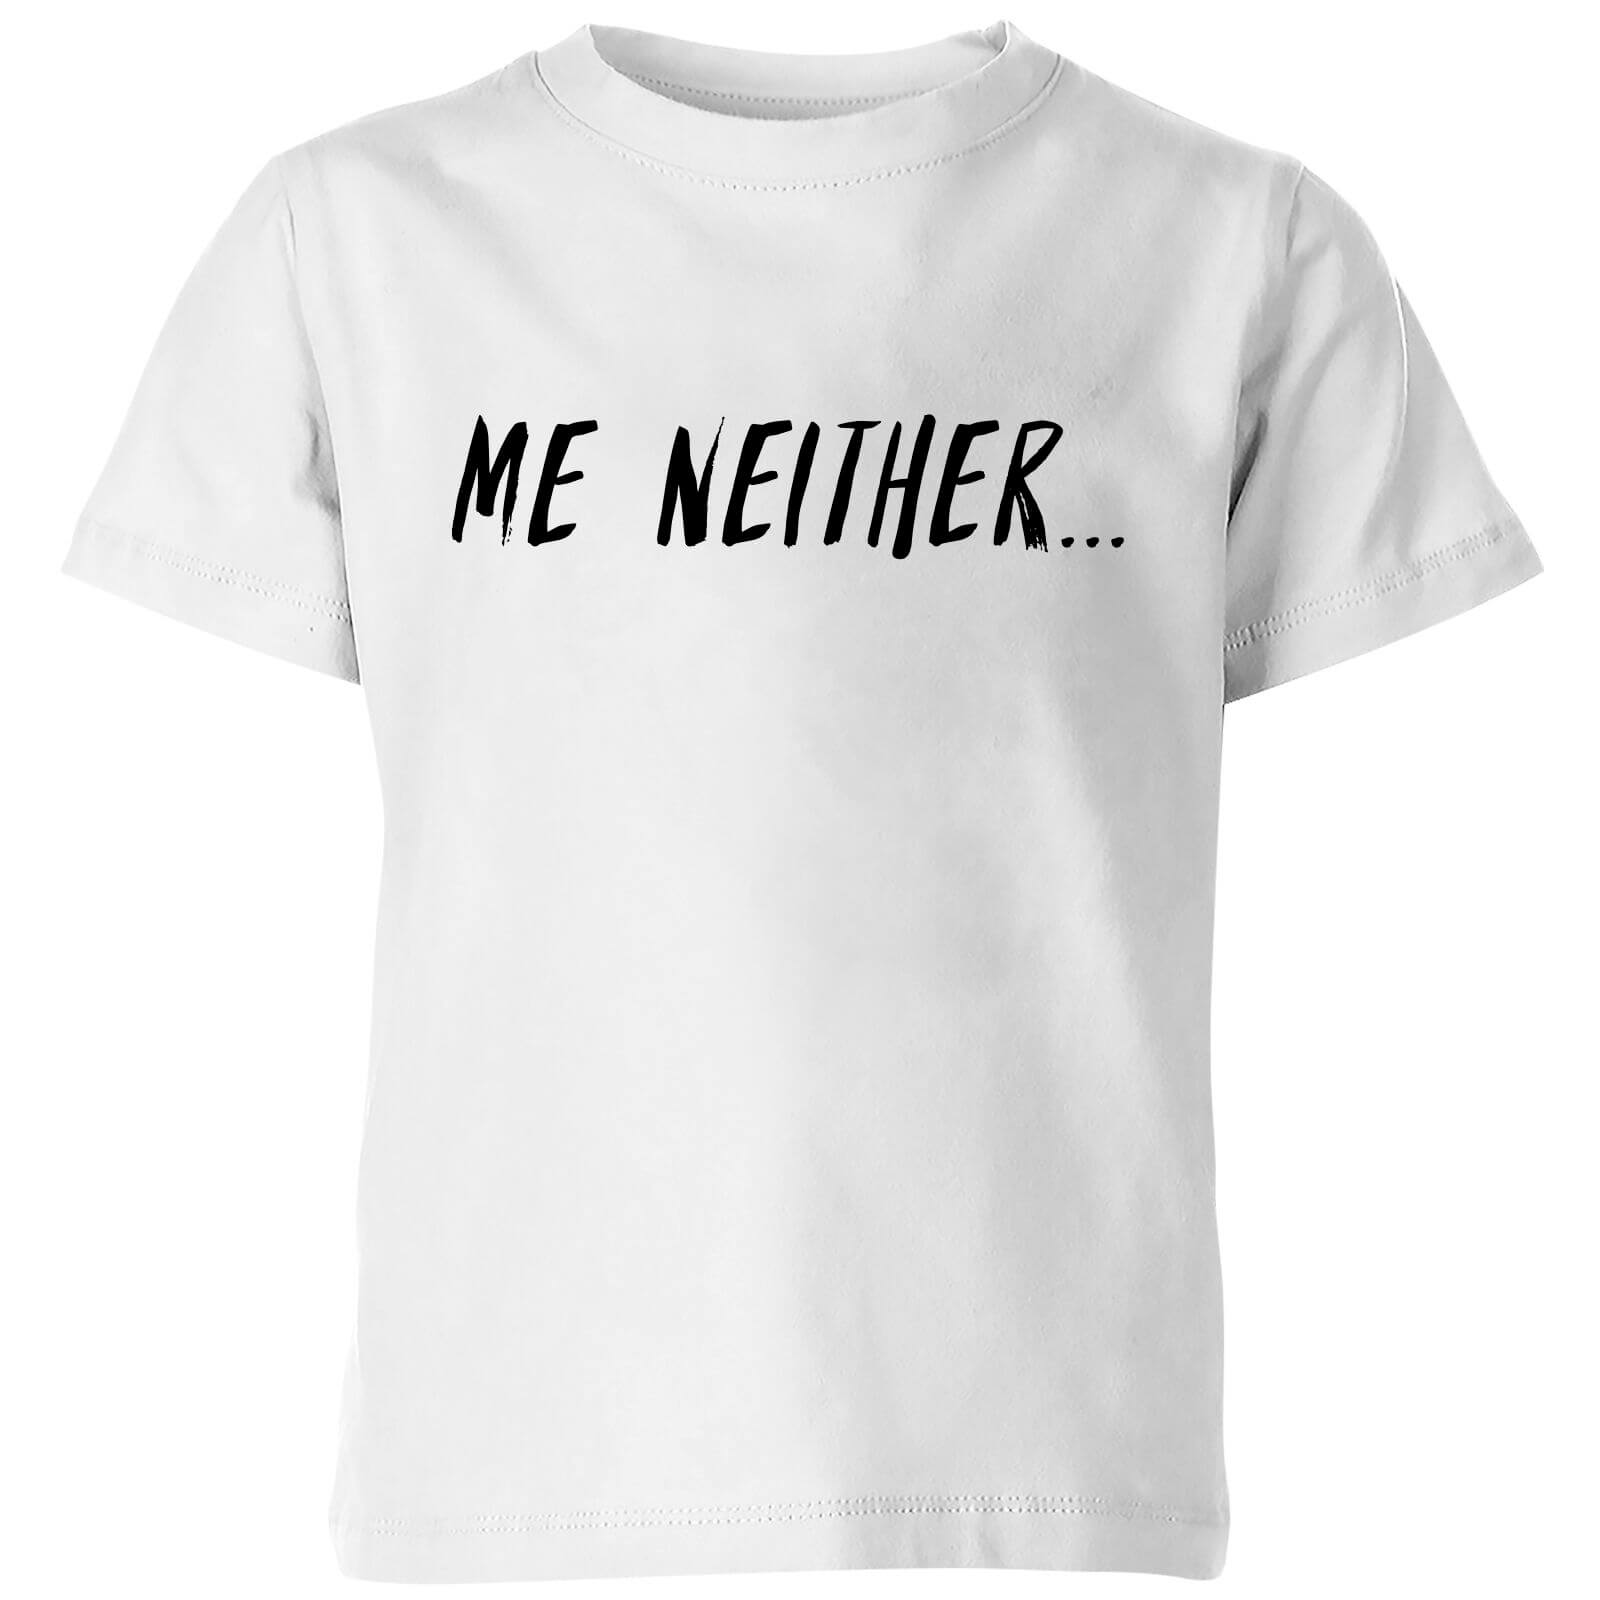 My Little Rascal Me Neither Kids' T-Shirt - White - 3-4 Years - White